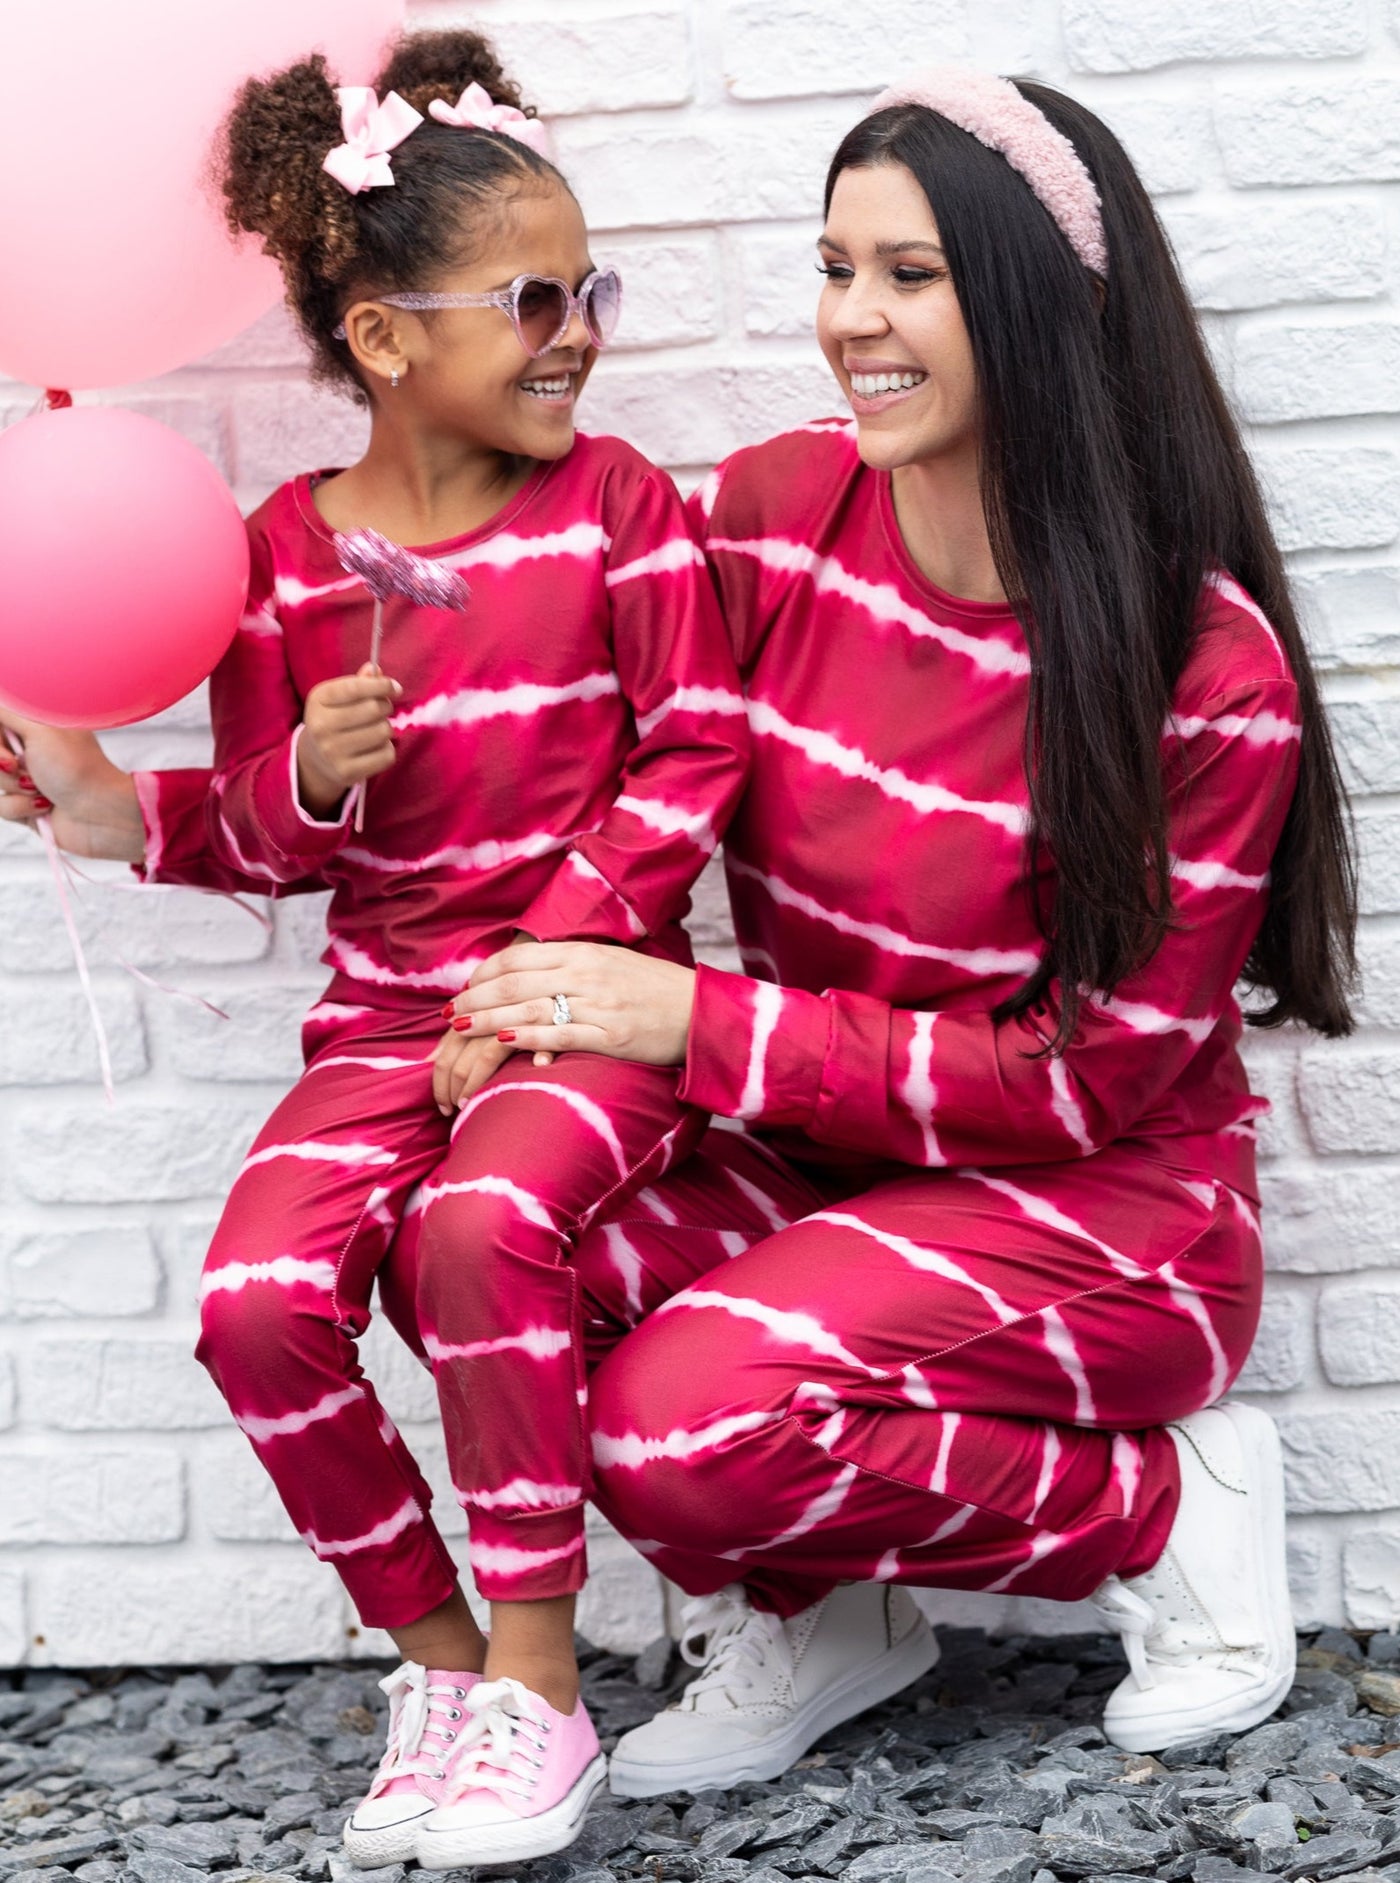 Mommy and Me Strong Ties Tie Dye Loungewear Set